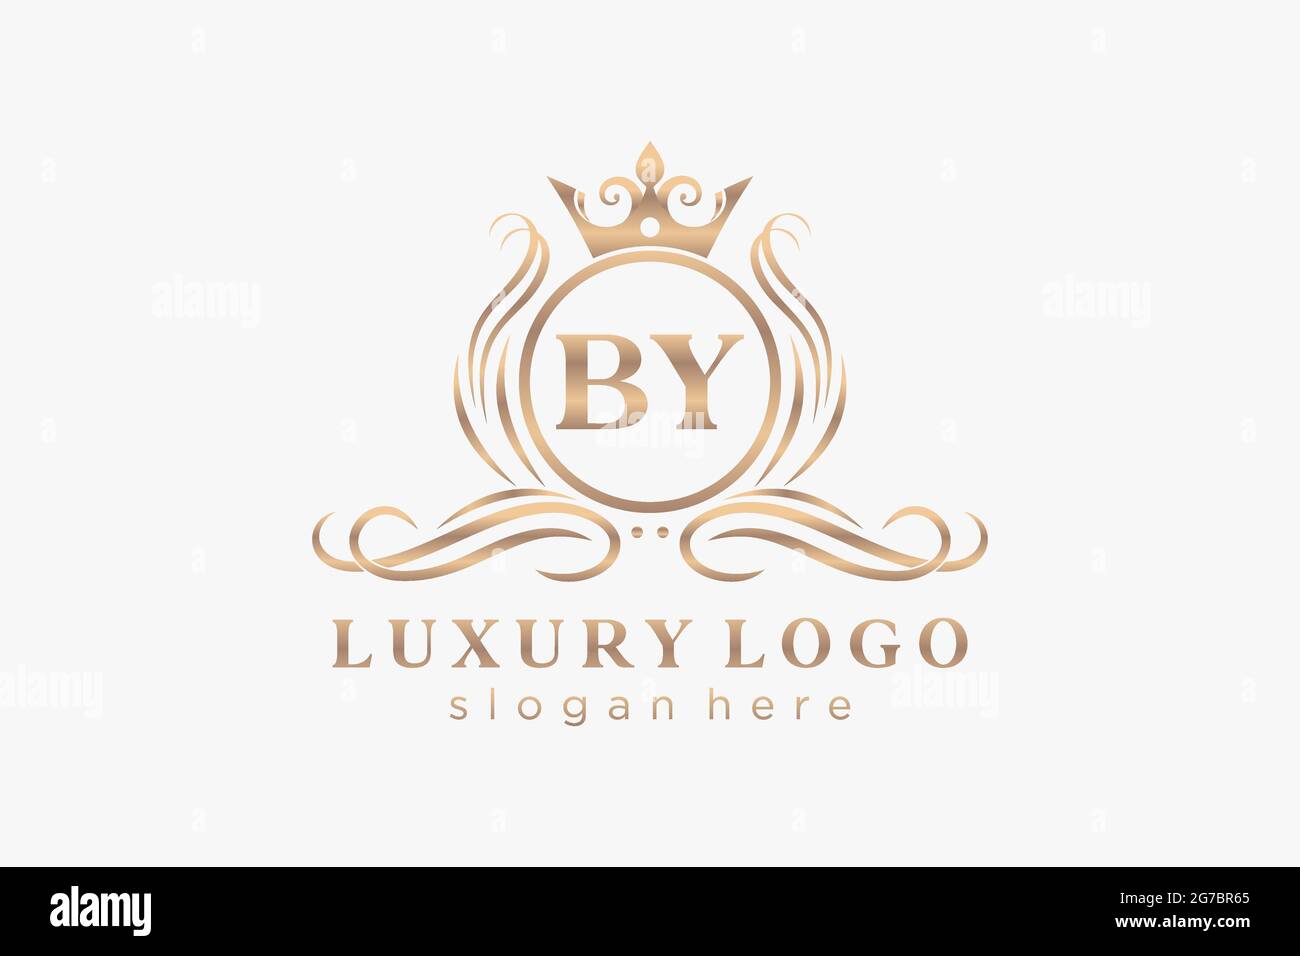 BY Letter Royal Luxury Logo template in vector art for Restaurant, Royalty, Boutique, Cafe, Hotel, Heraldic, Jewelry, Fashion and other vector illustr Stock Vector